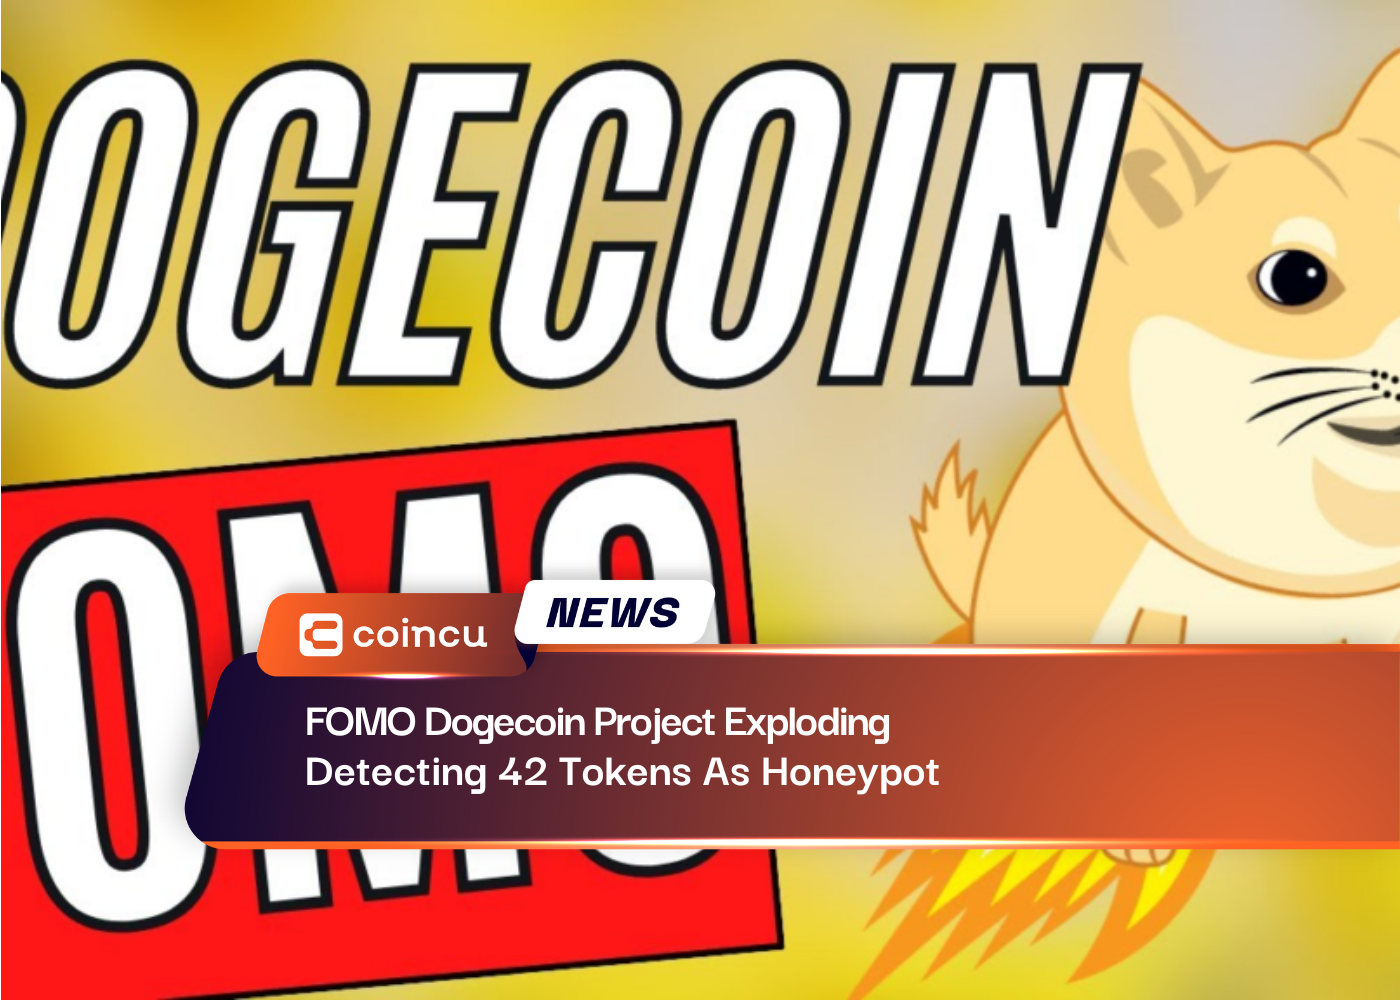 FOMO Dogecoin Project Exploding, Detecting 42 Tokens As Honeypot